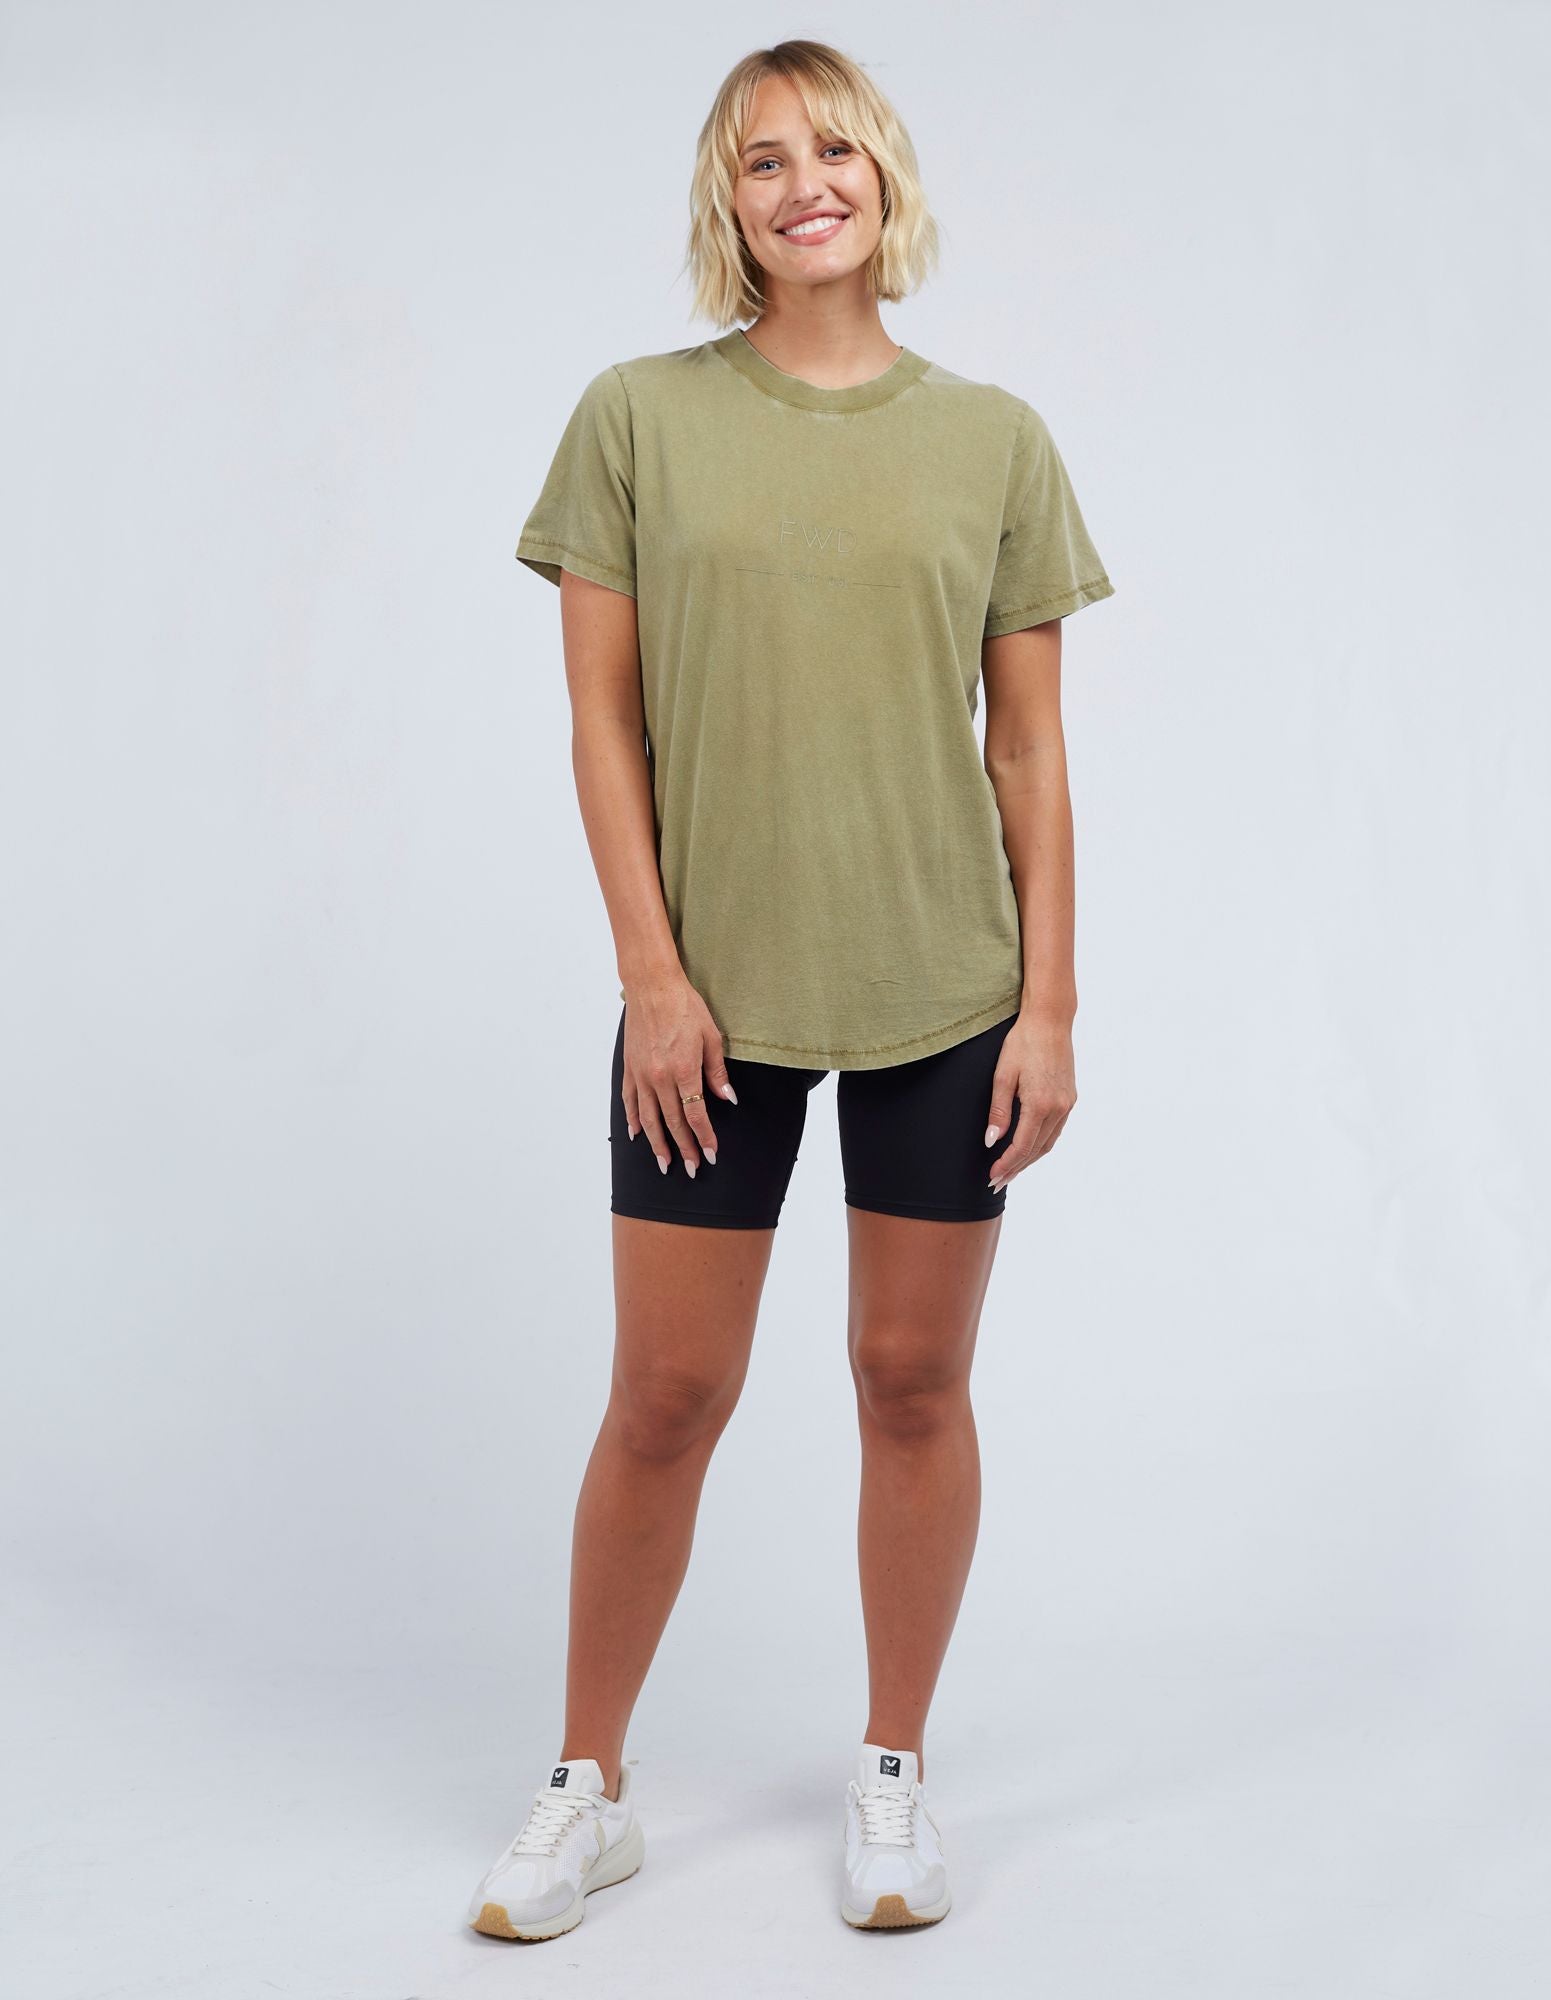 Fly Tee - Olive - Foxwood - FUDGE Gifts Home Lifestyle